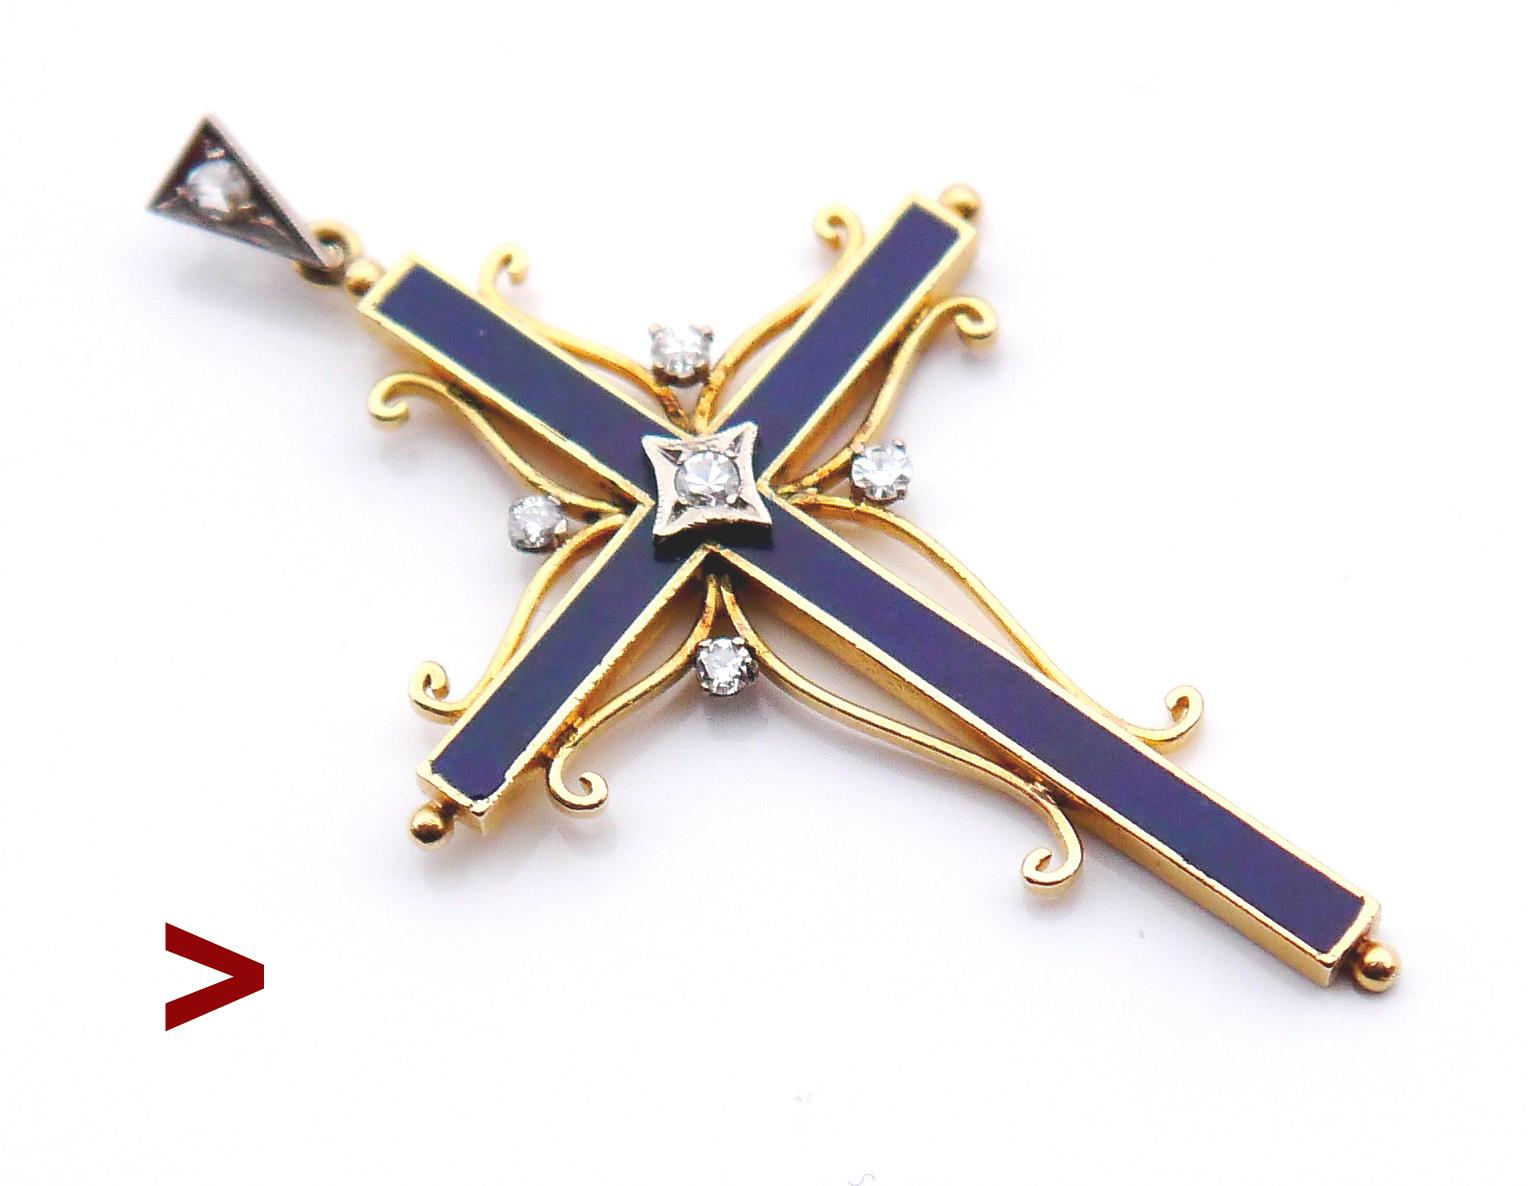 Russian or European ca. early XX cent. Gold, Enamel and Diamonds Cross Pendant.

Handcrafted in 18K Yellow Gold (tested) , enameled with cobalt Blue enamel and accented with 5old European diamond cut Diamonds ( color ca G,H /VVS) +1 rose cut diamond